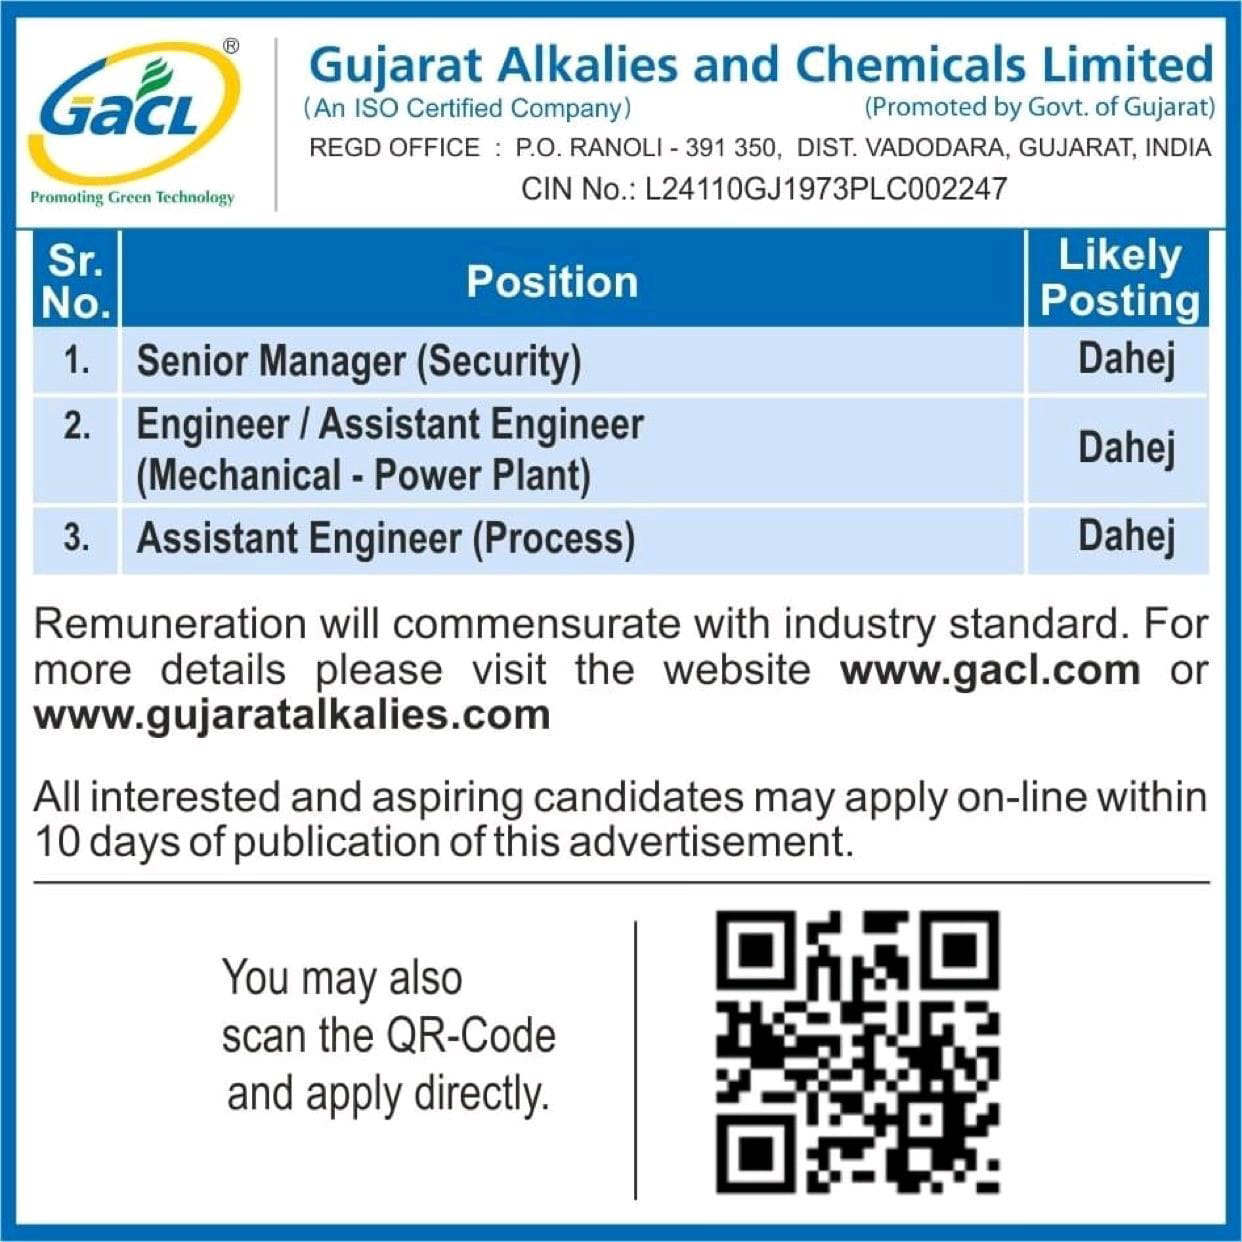 Job available for Gujarat Alkalies and Chemicals Limited Job vacancy for B.E/ B.Tech/ Senior Manager/ Assistant Engineer